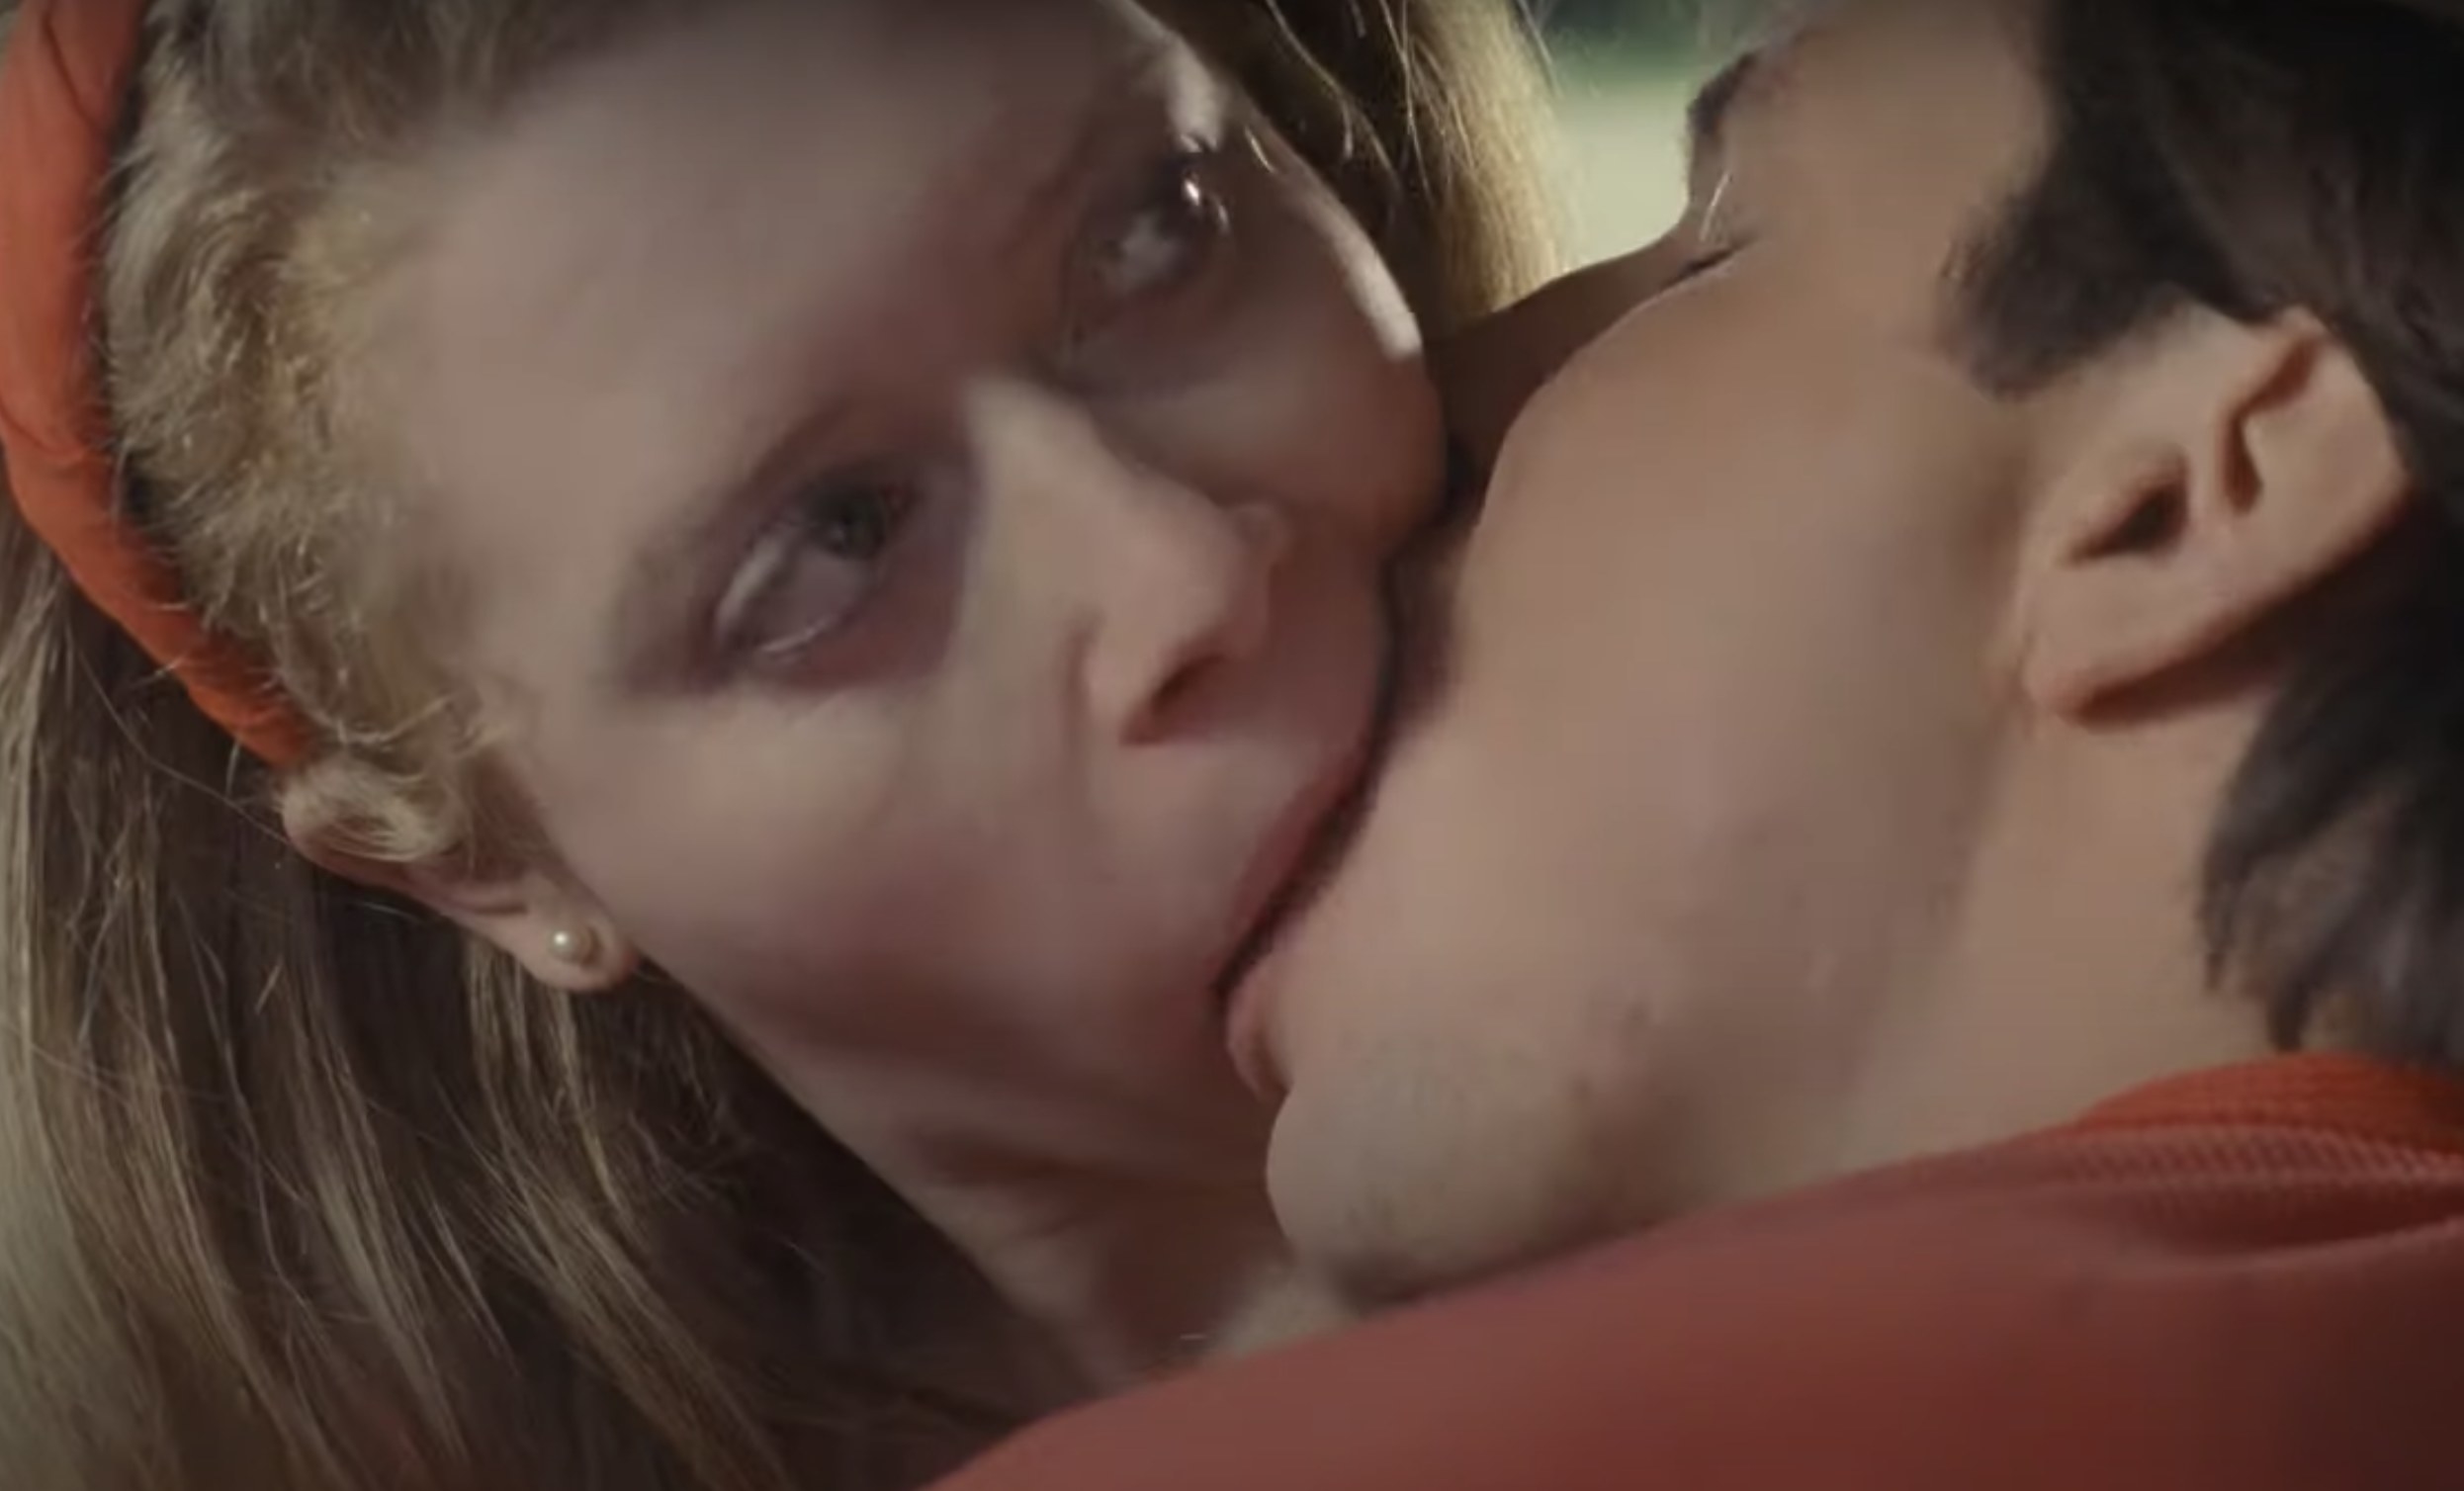 Actor Natasha Lyonne has her eyes wide open and looks uncertainly as she makes out with a boy.